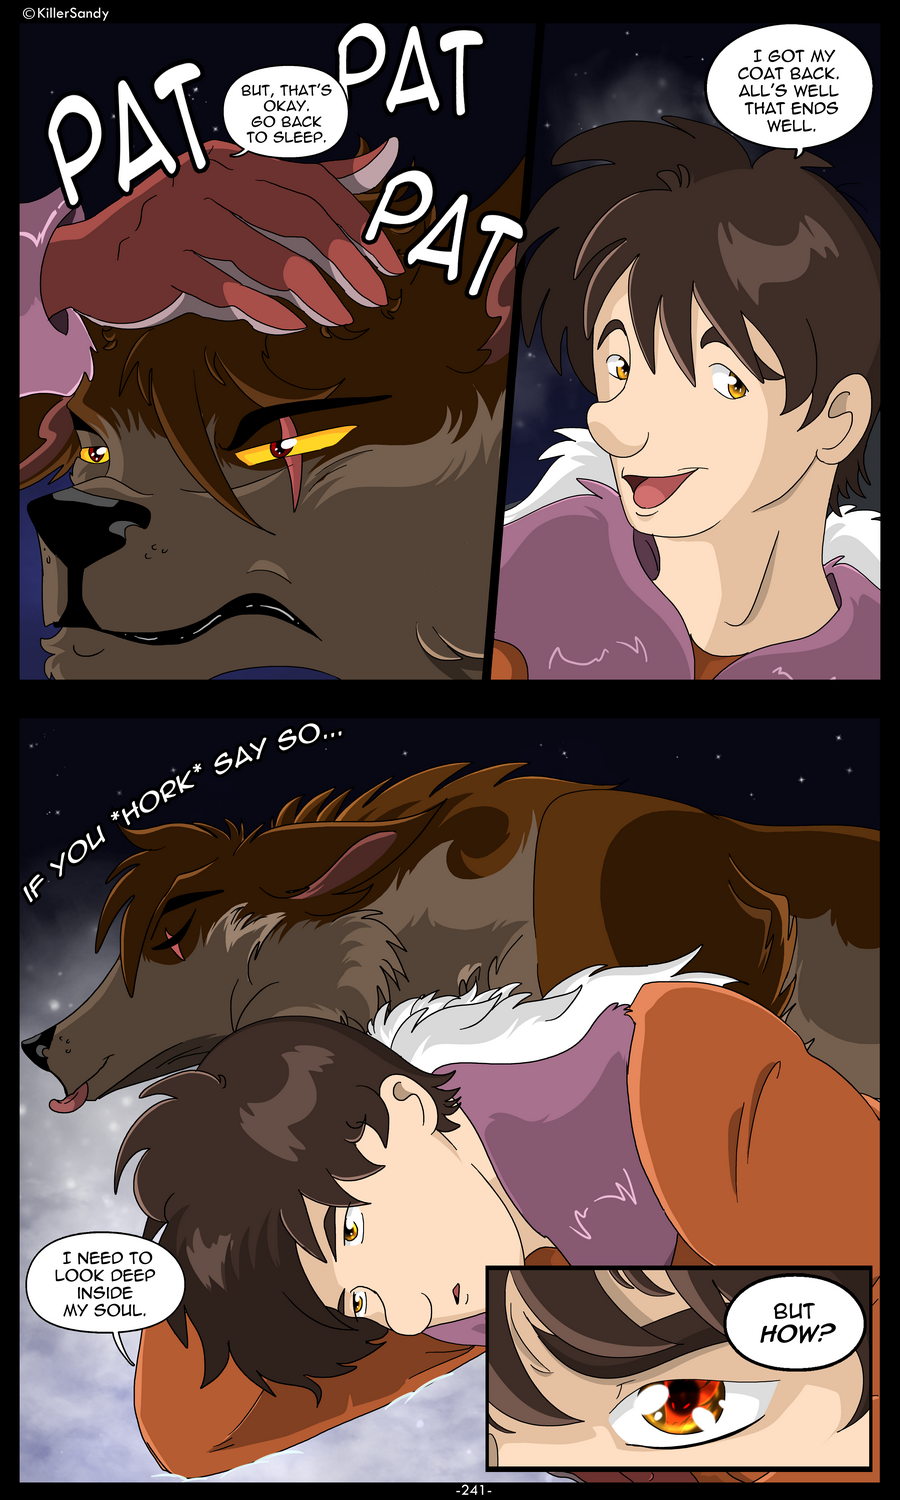 The Prince of the Moonlight Stone page 241